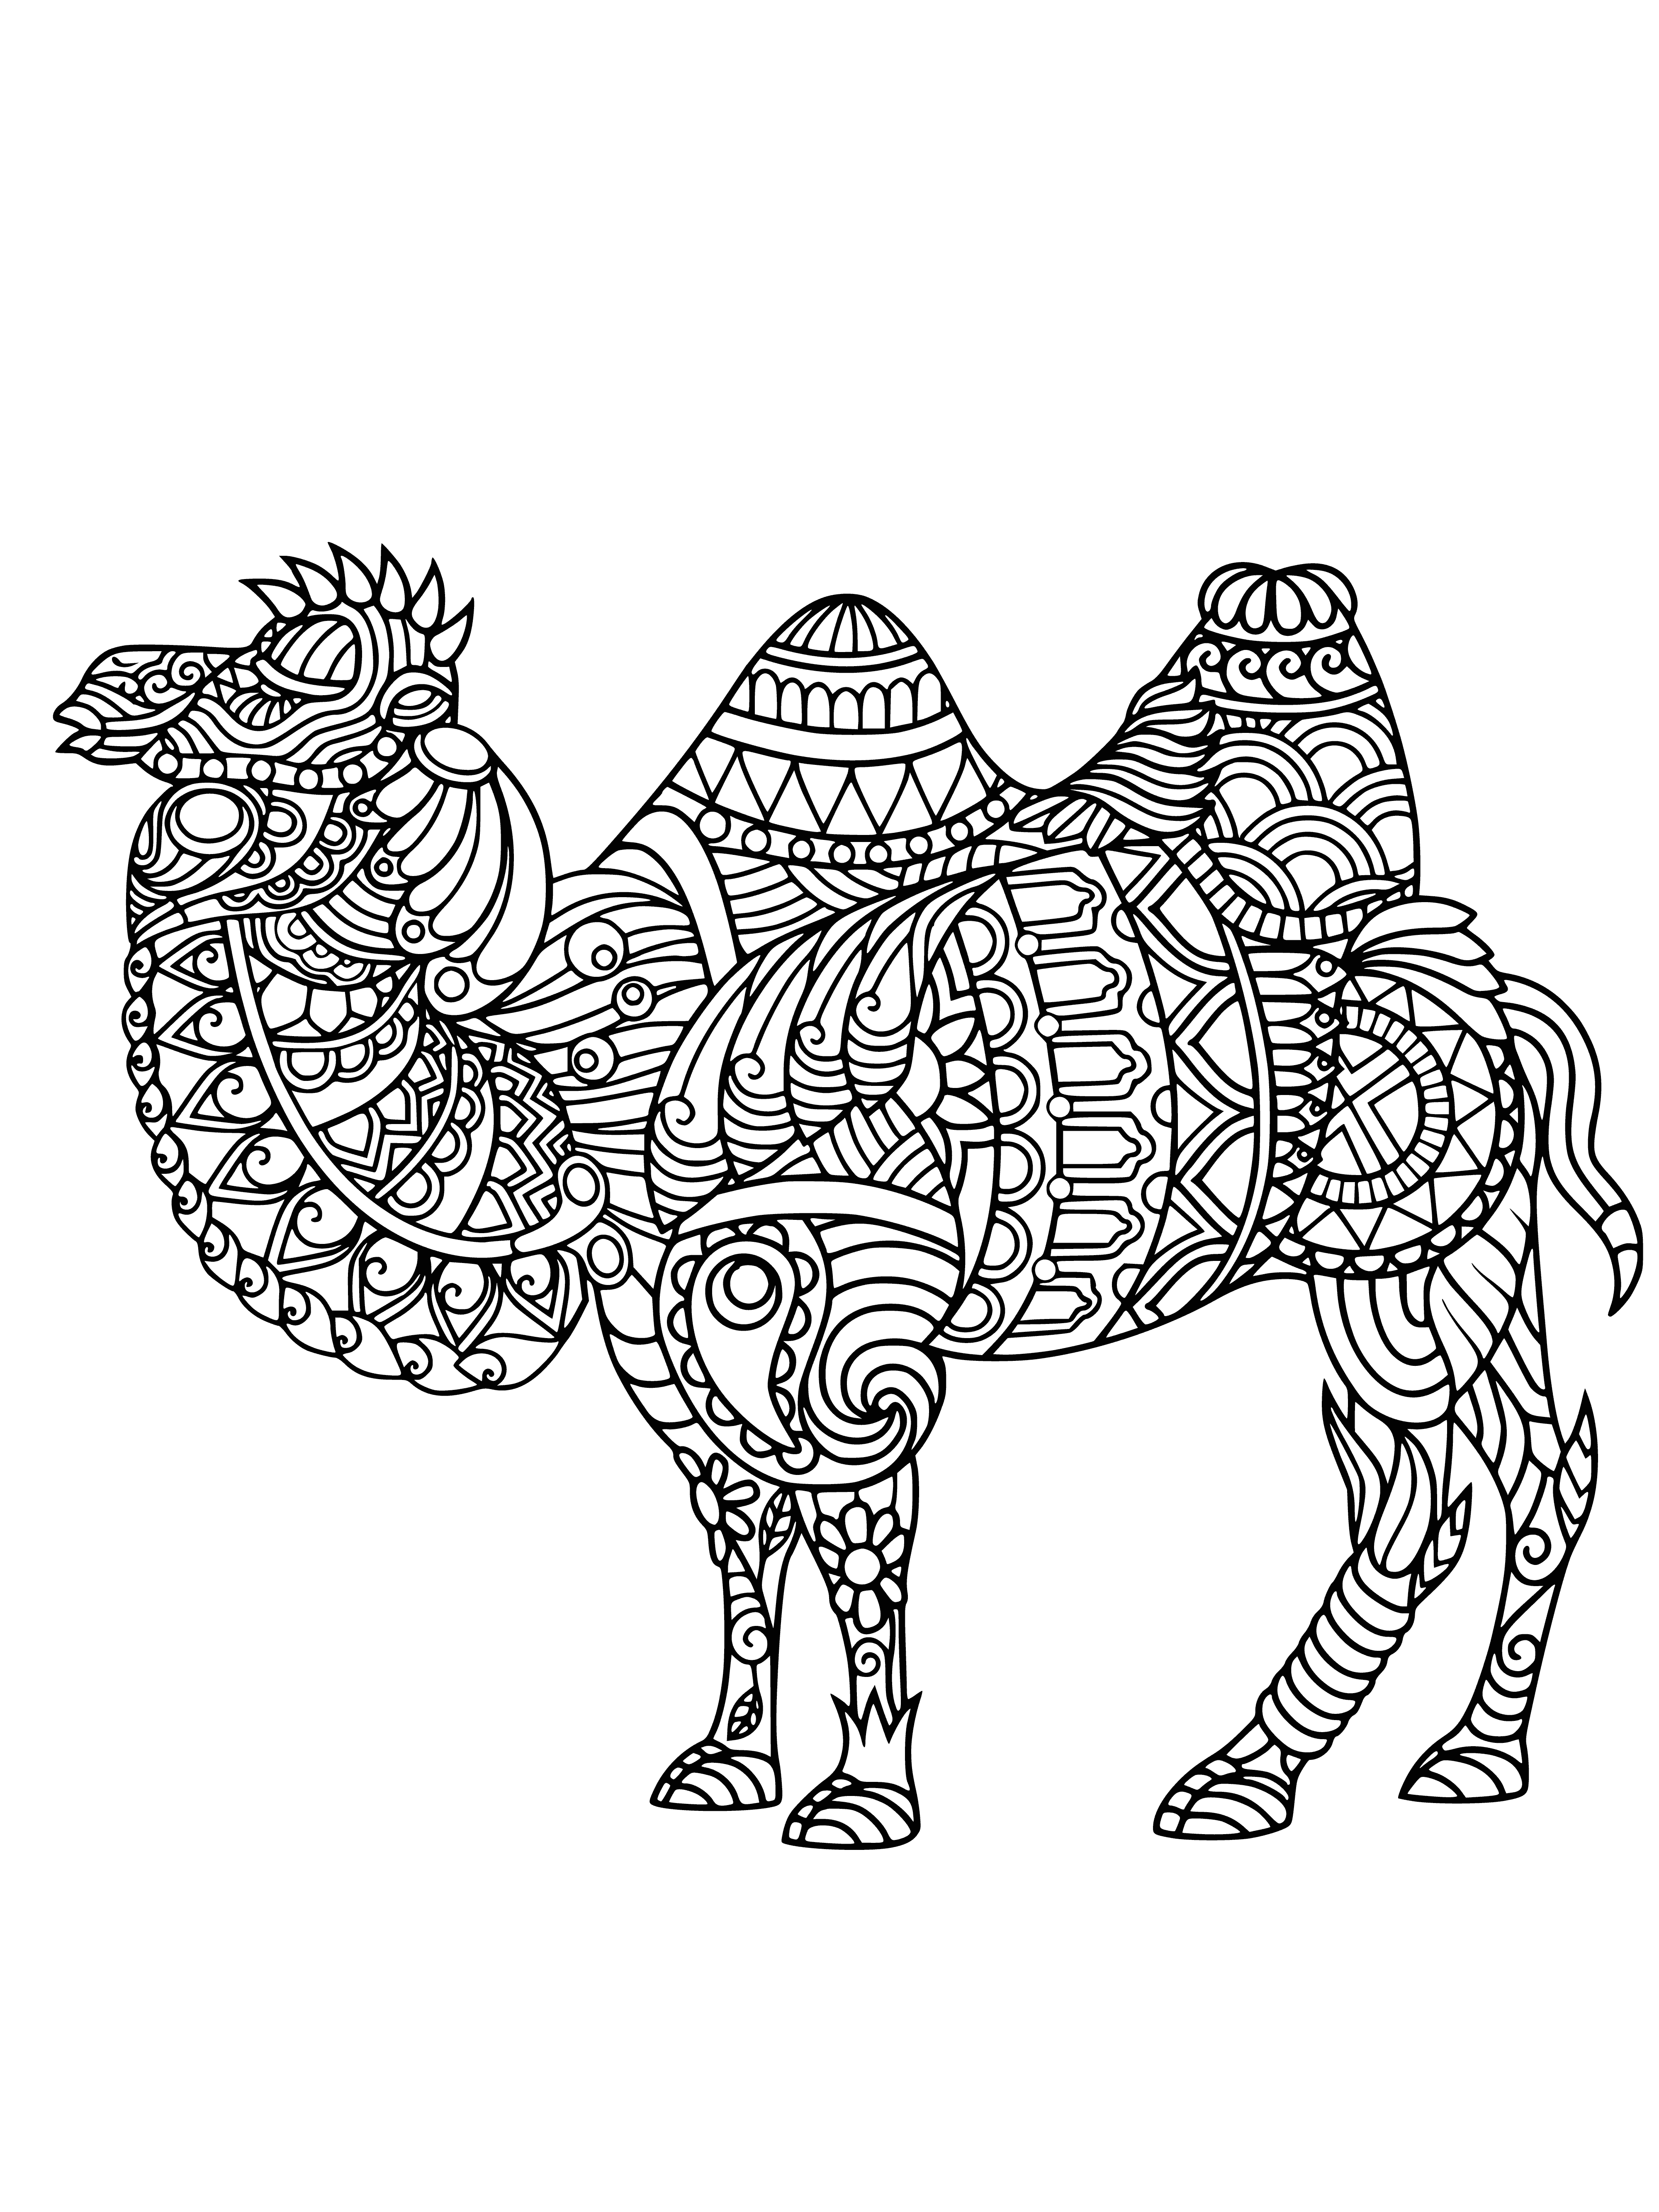 coloring page: Dromedary camel gazing with big, brown eyes. Light brown coat and long neck with a rounded hump, standing in desert-like landscape.